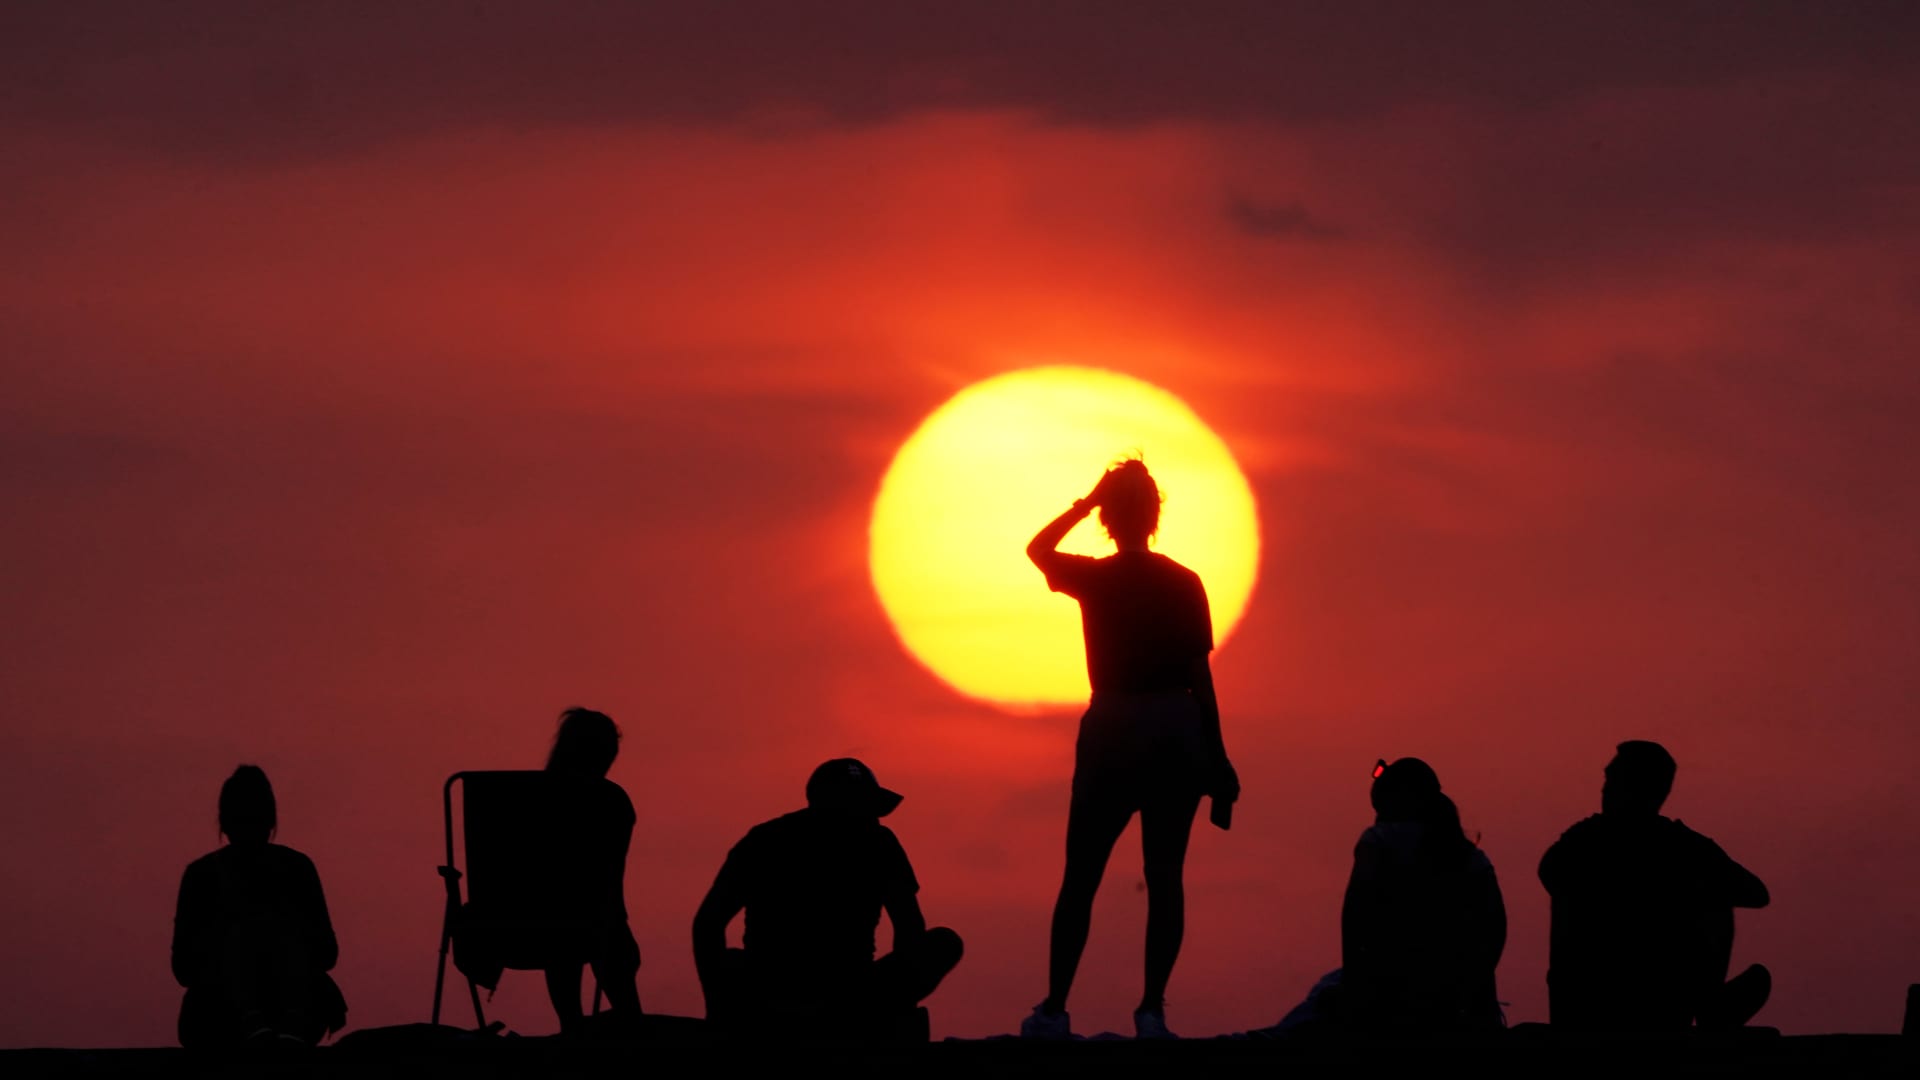 UK shatters record for its hottest day ever with temperatures hitting 104.4 Fahrenheit